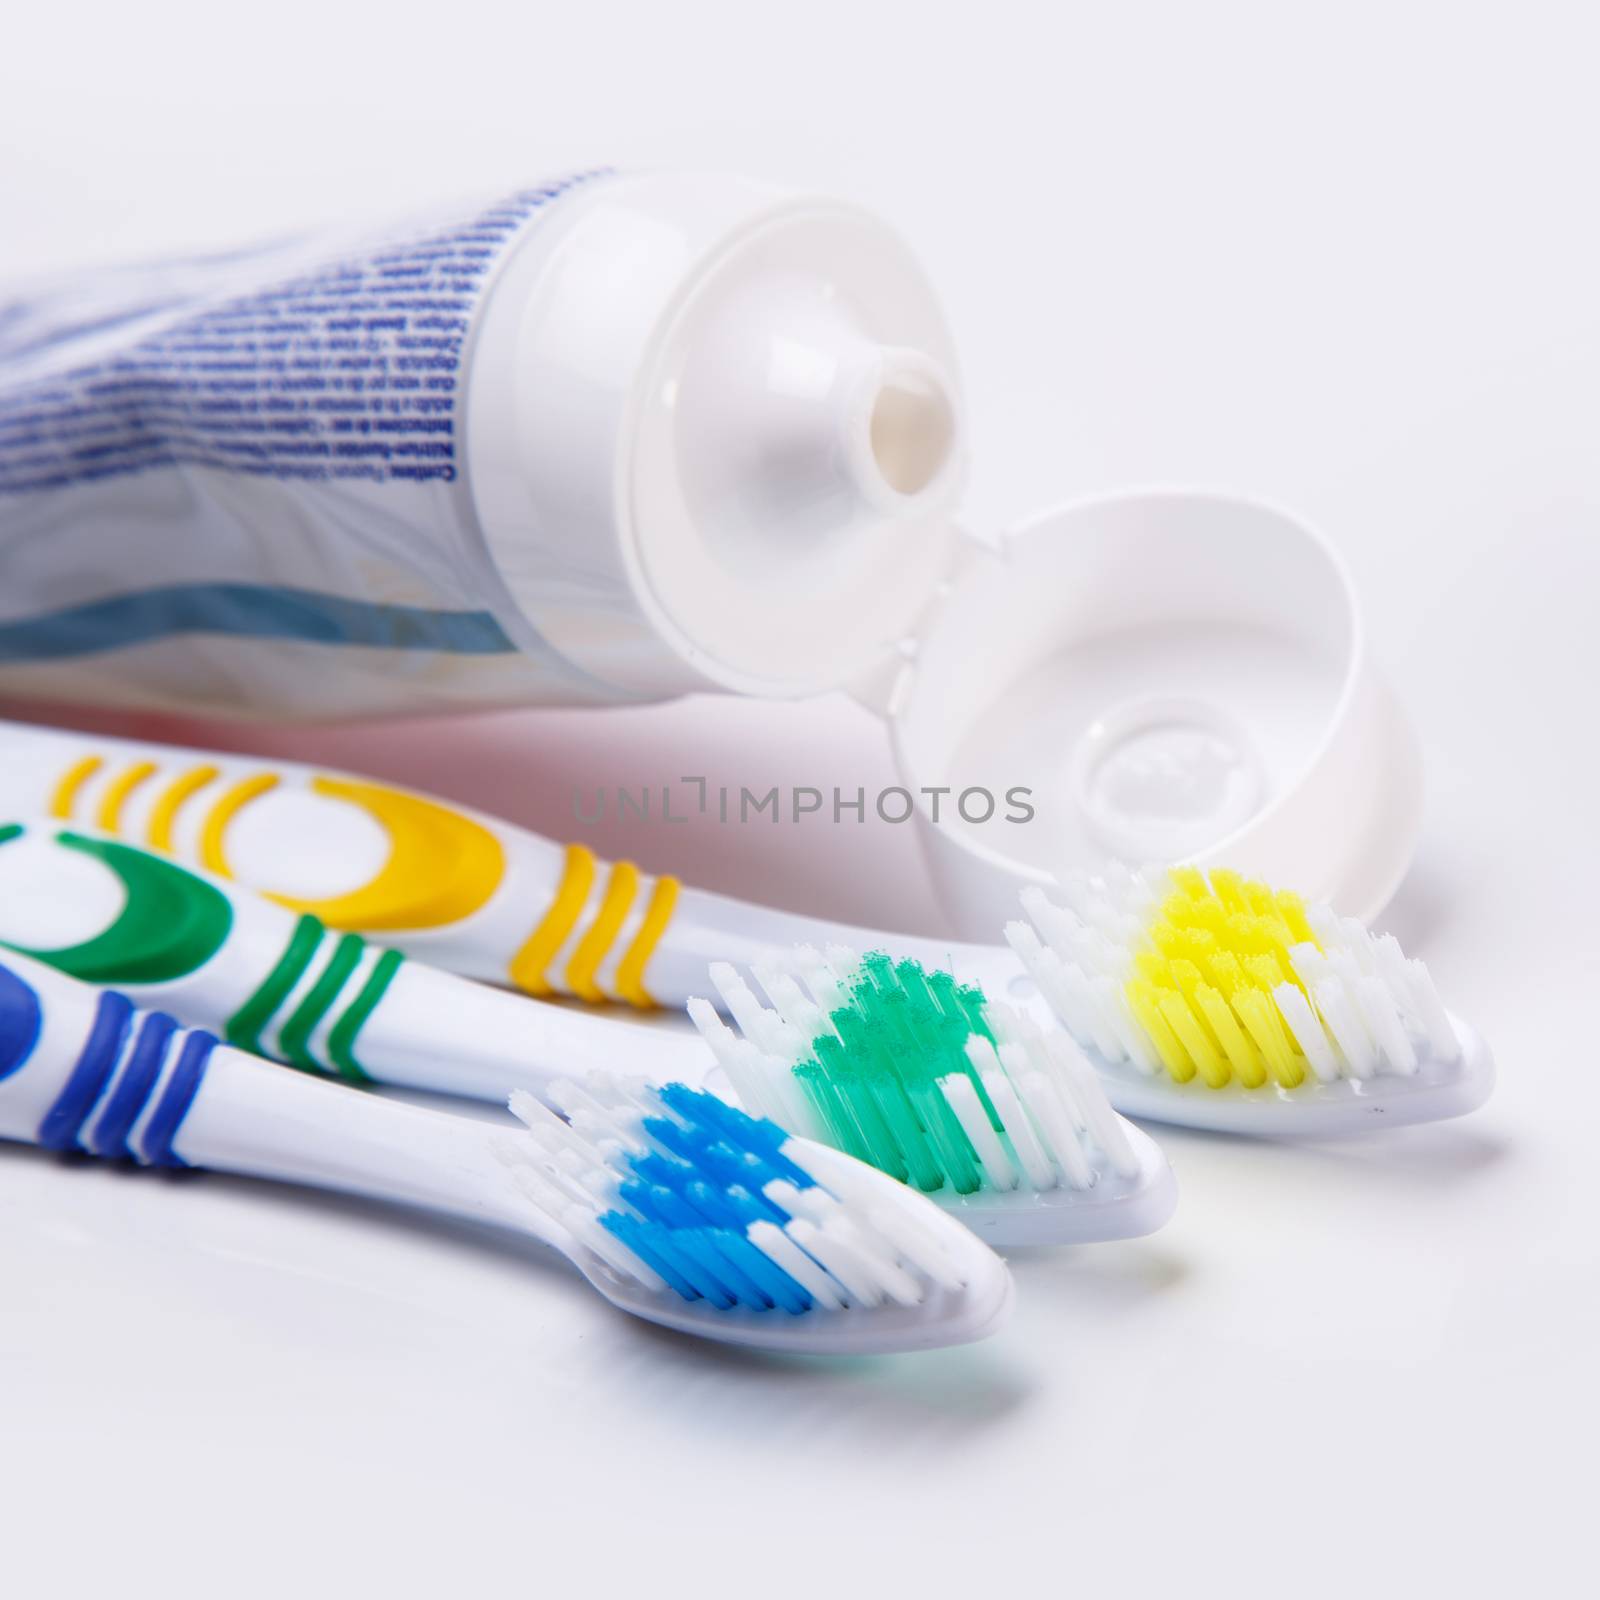 Toothbrushes on the table by rufatjumali